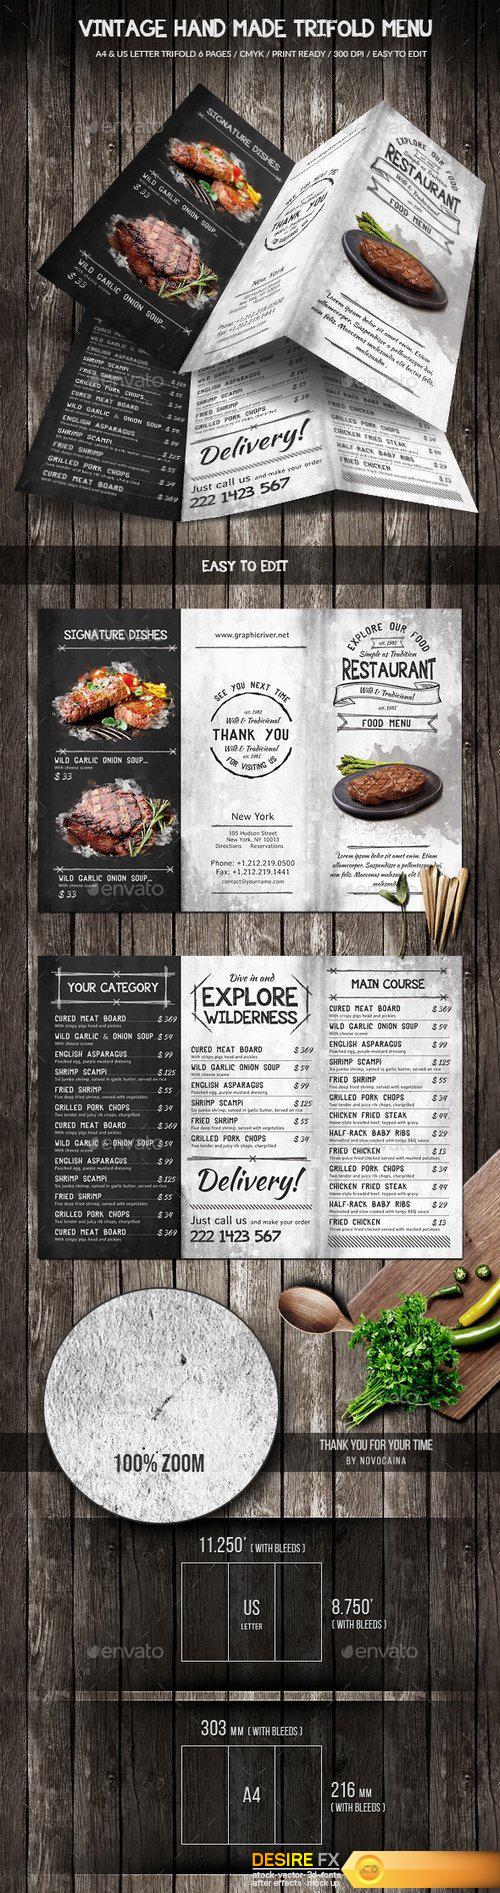 Graphicriver - Vintage Hand Made Trifold Food Menu A4 & US Letter 21883186